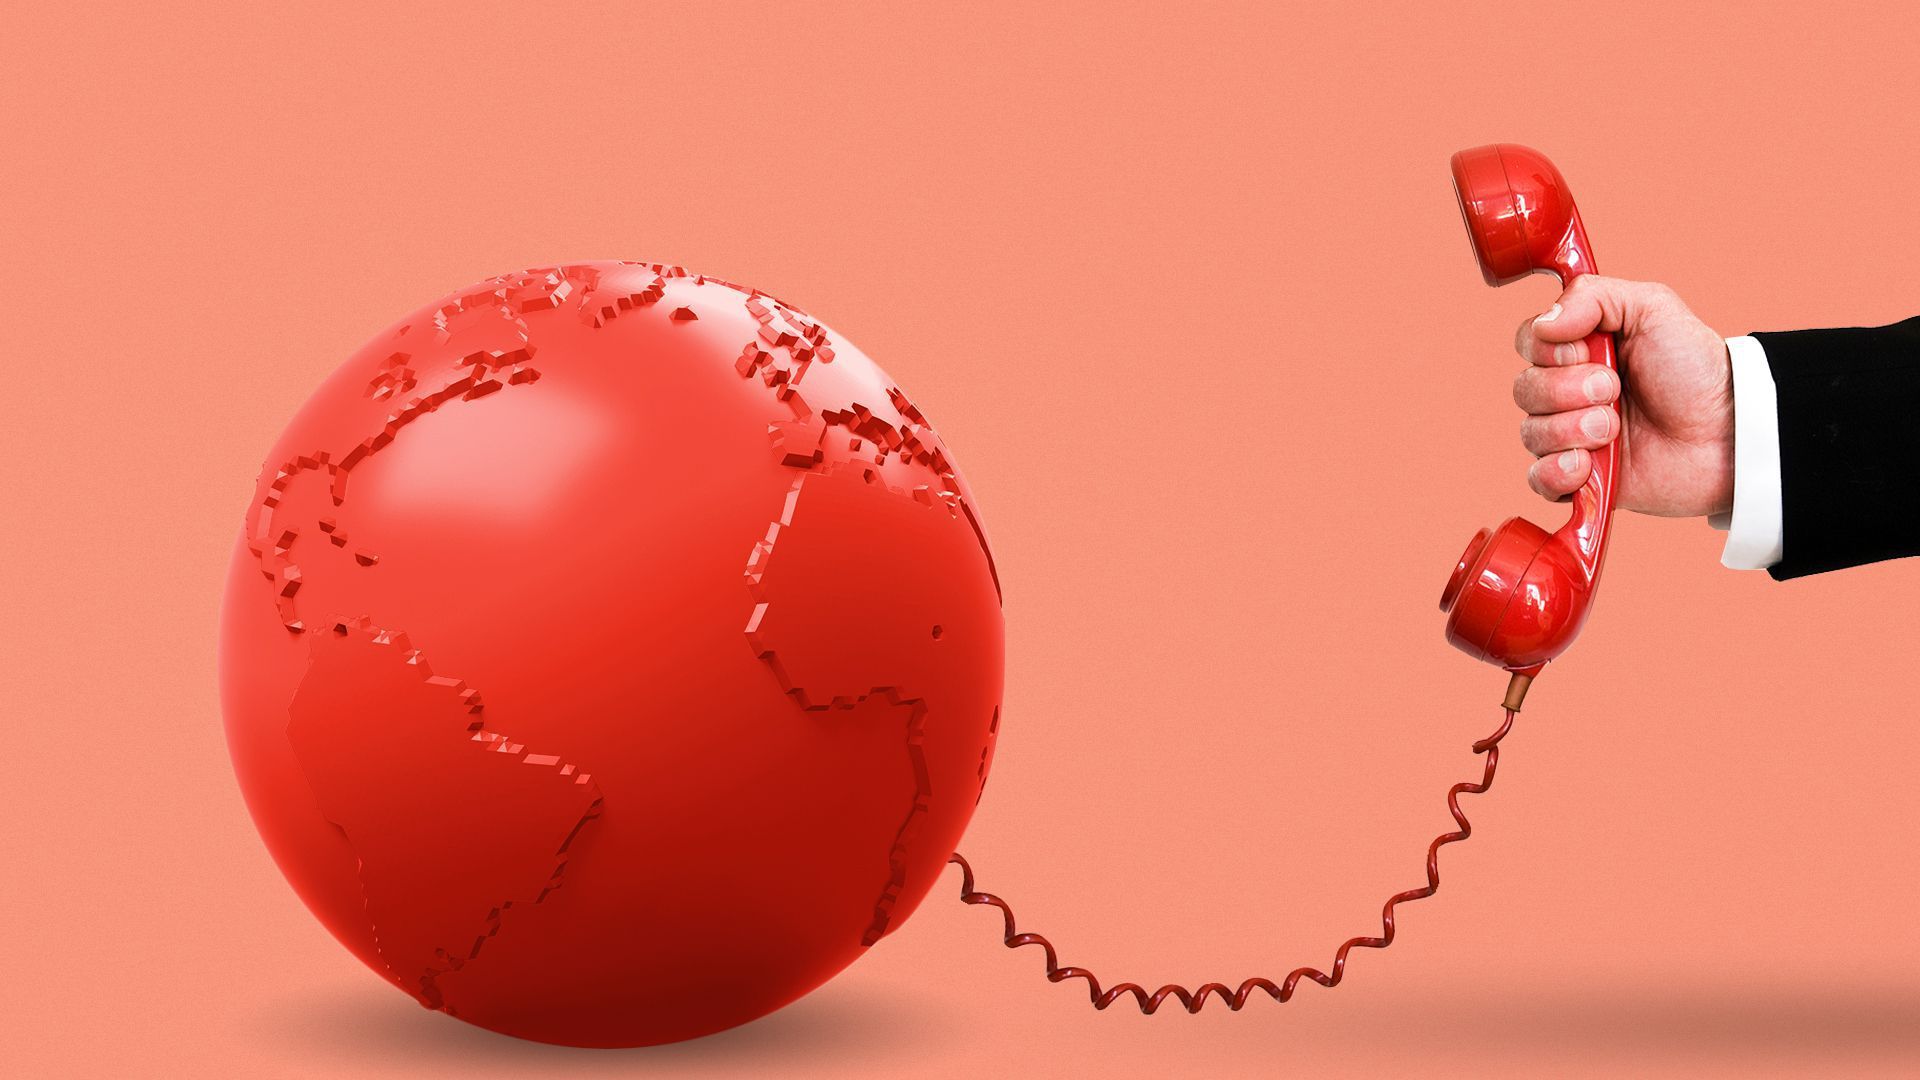 Illustration of a red globe with a phone attached.